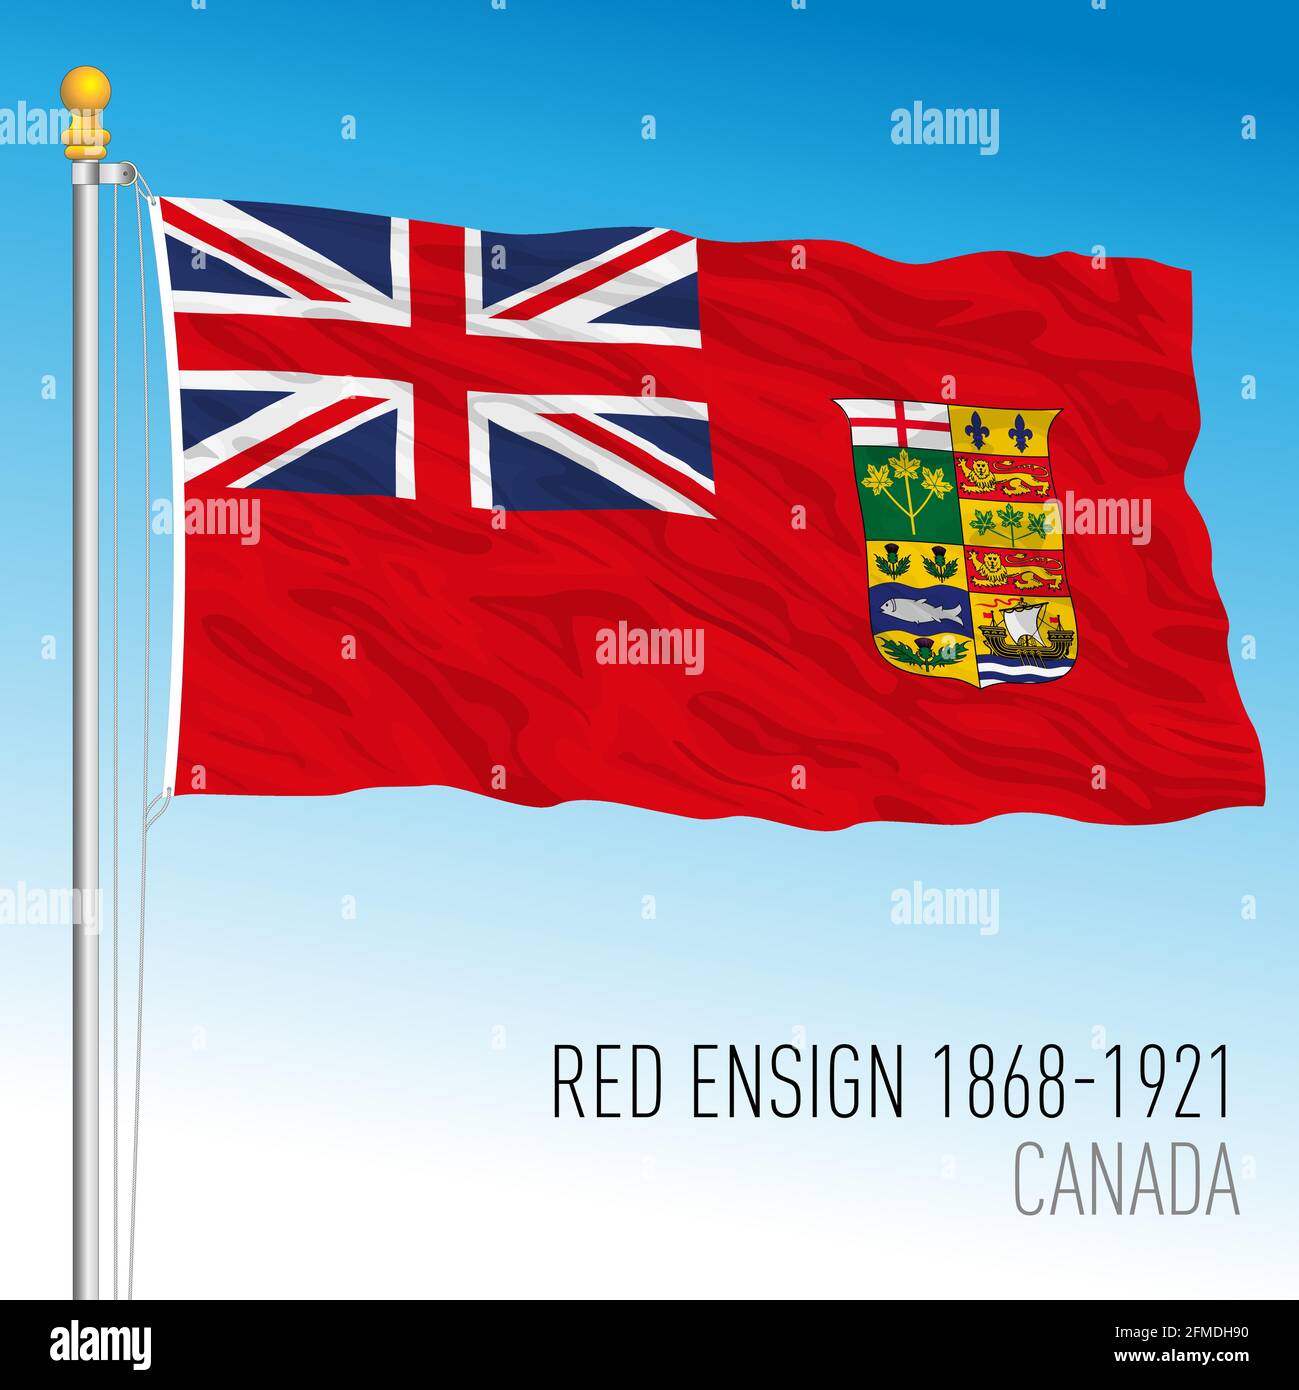 Canadian red ensign historical flag, 1868 - 1921, Canada, vector illustration Stock Vector